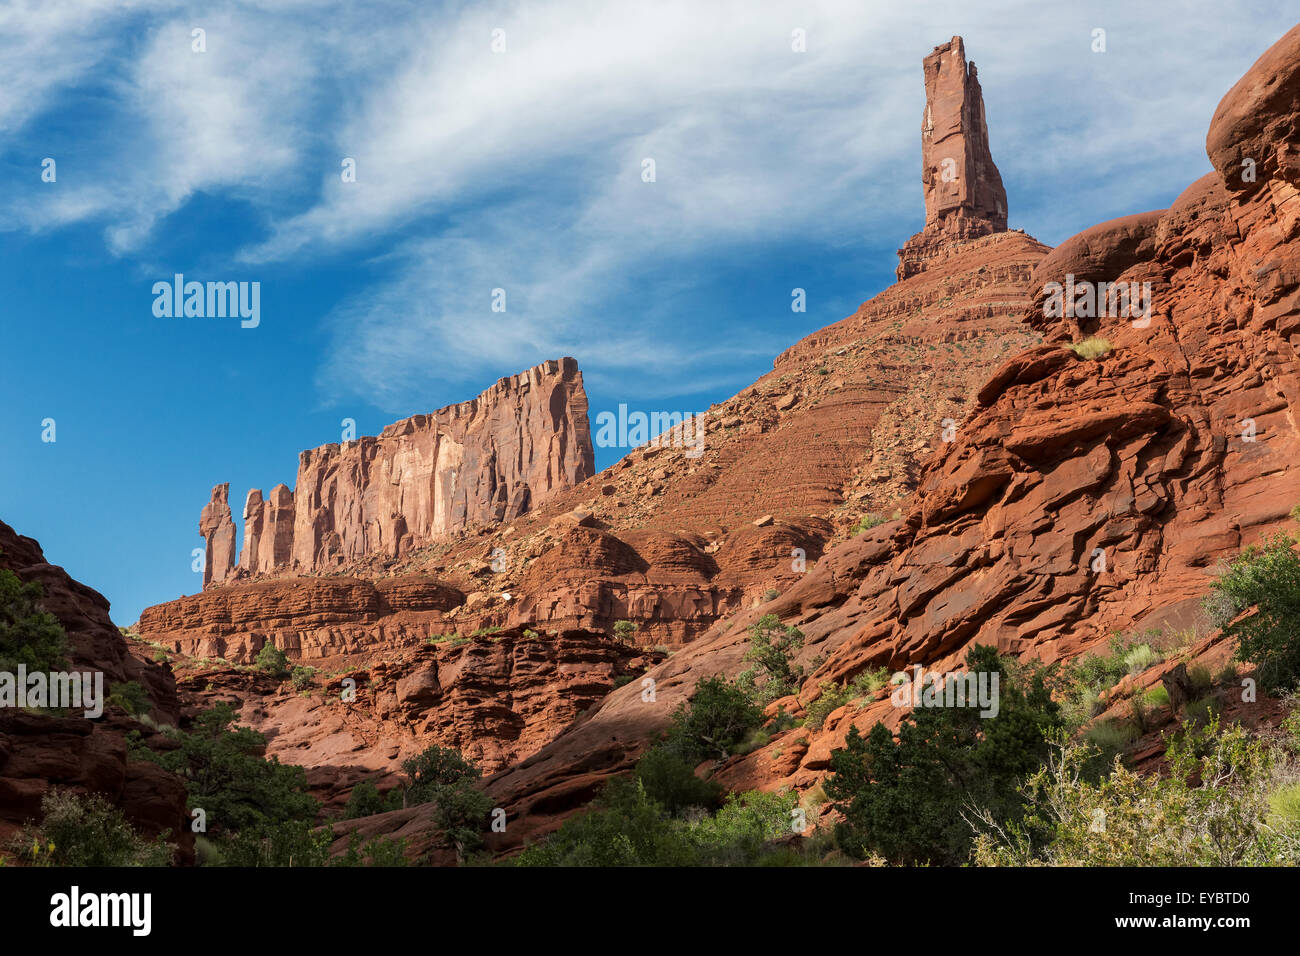 Wingate sandstone buttes, Castleton Tower and Priest and Nuns aka: the Rectory, Castle Valley, Moab, Utah Stock Photo